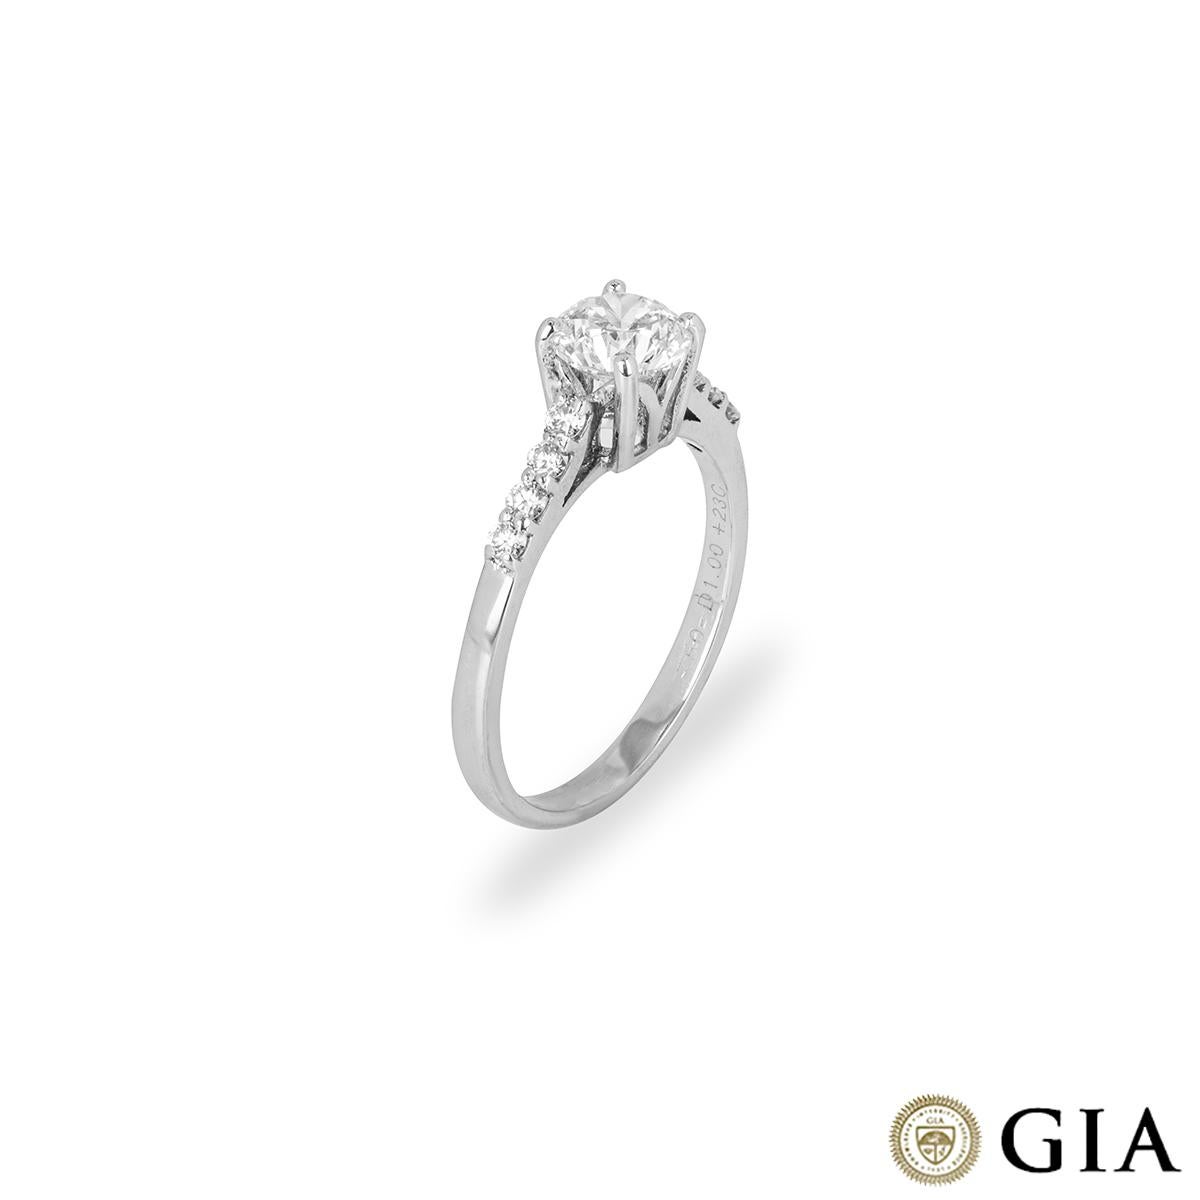 A beautiful platinum diamond engagement ring. The round brilliant cut diamond in a four claw setting weighs 1.51ct, is E colour and VVS2 in clarity. The ring is currently a size UK M½/US 6.5/EU 53 but can be adjusted for a perfect fit with a gross